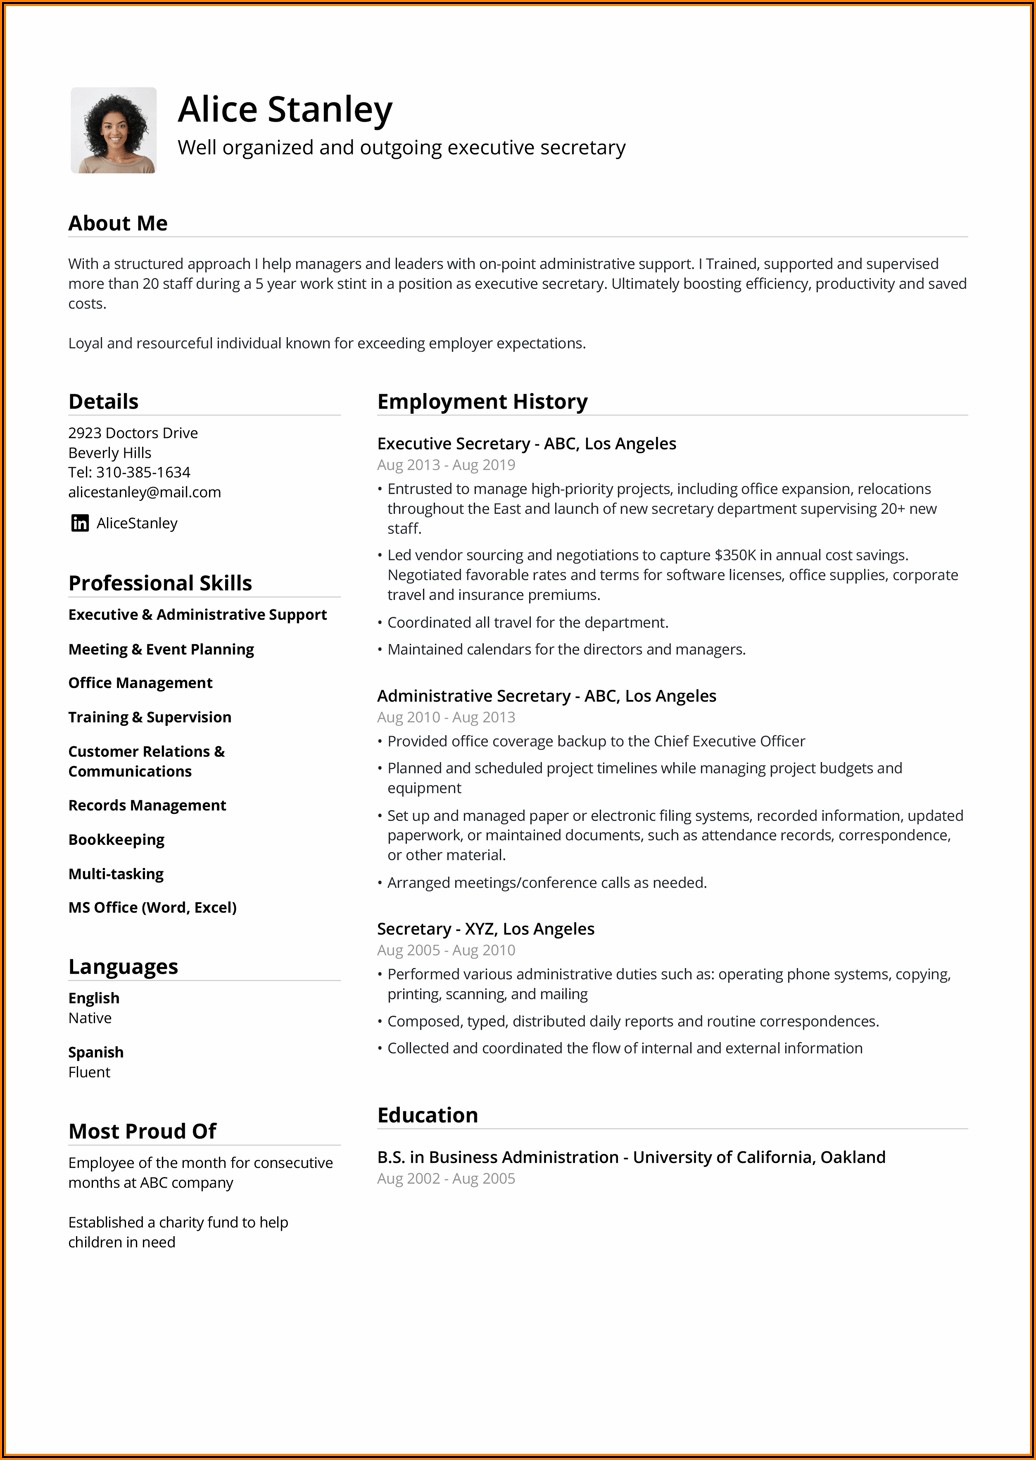 Free Online Resume Builder For High School Students